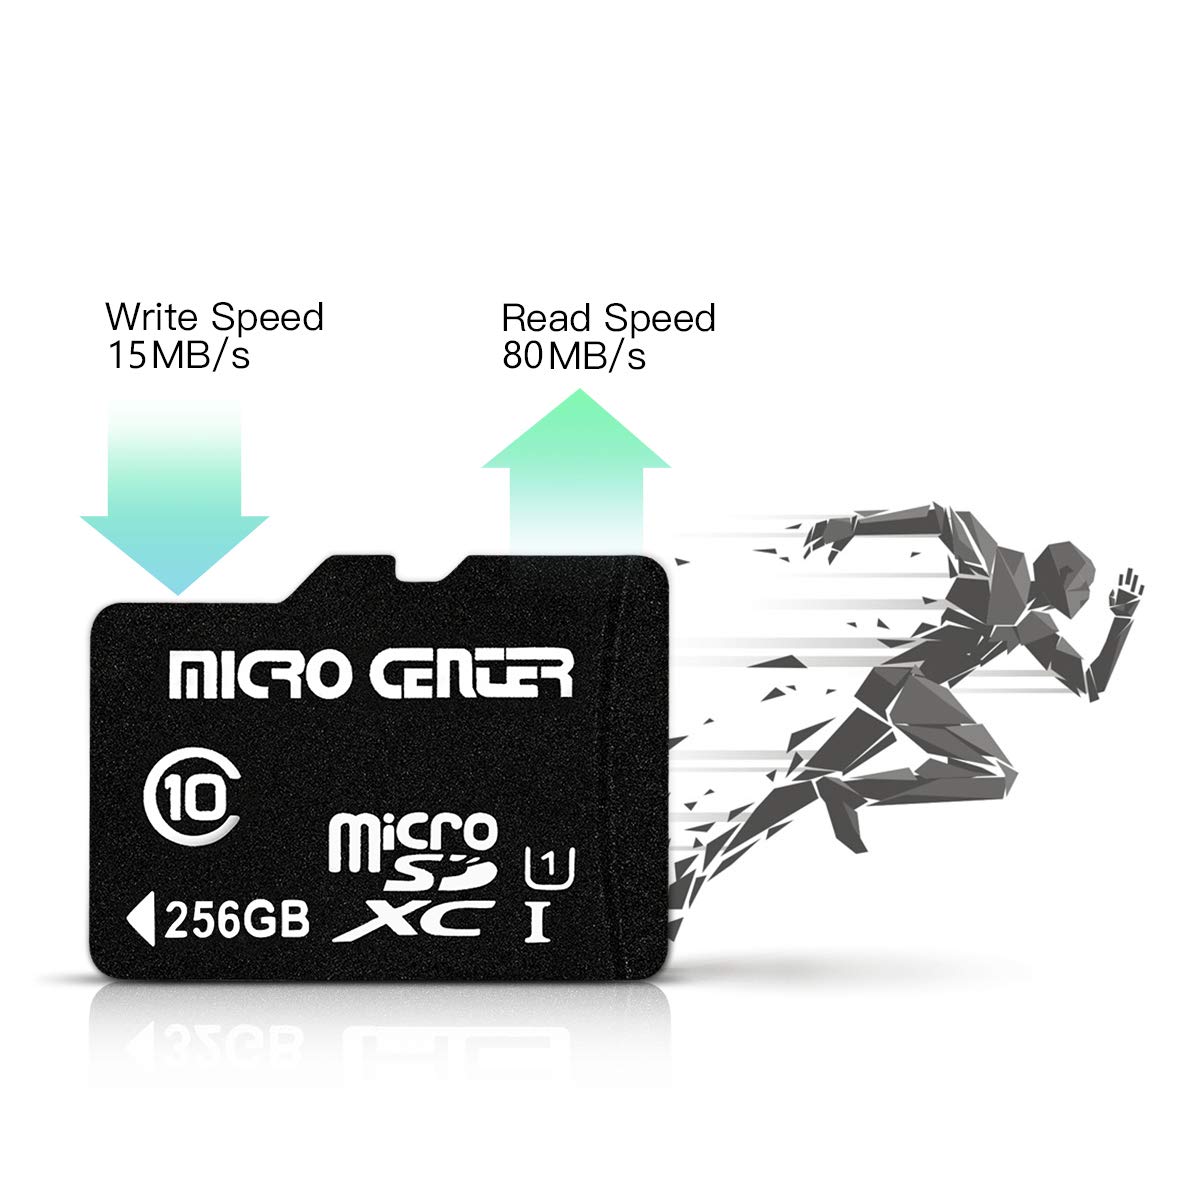 INLAND Micro Center 256GB Class 10 MicroSDXC Flash Memory Card with Adapter for Mobile Device Storage Phone, Tablet, Drone & Full HD Video Recording - 80MB/s UHS-I, C10, U1 (1 Pack)